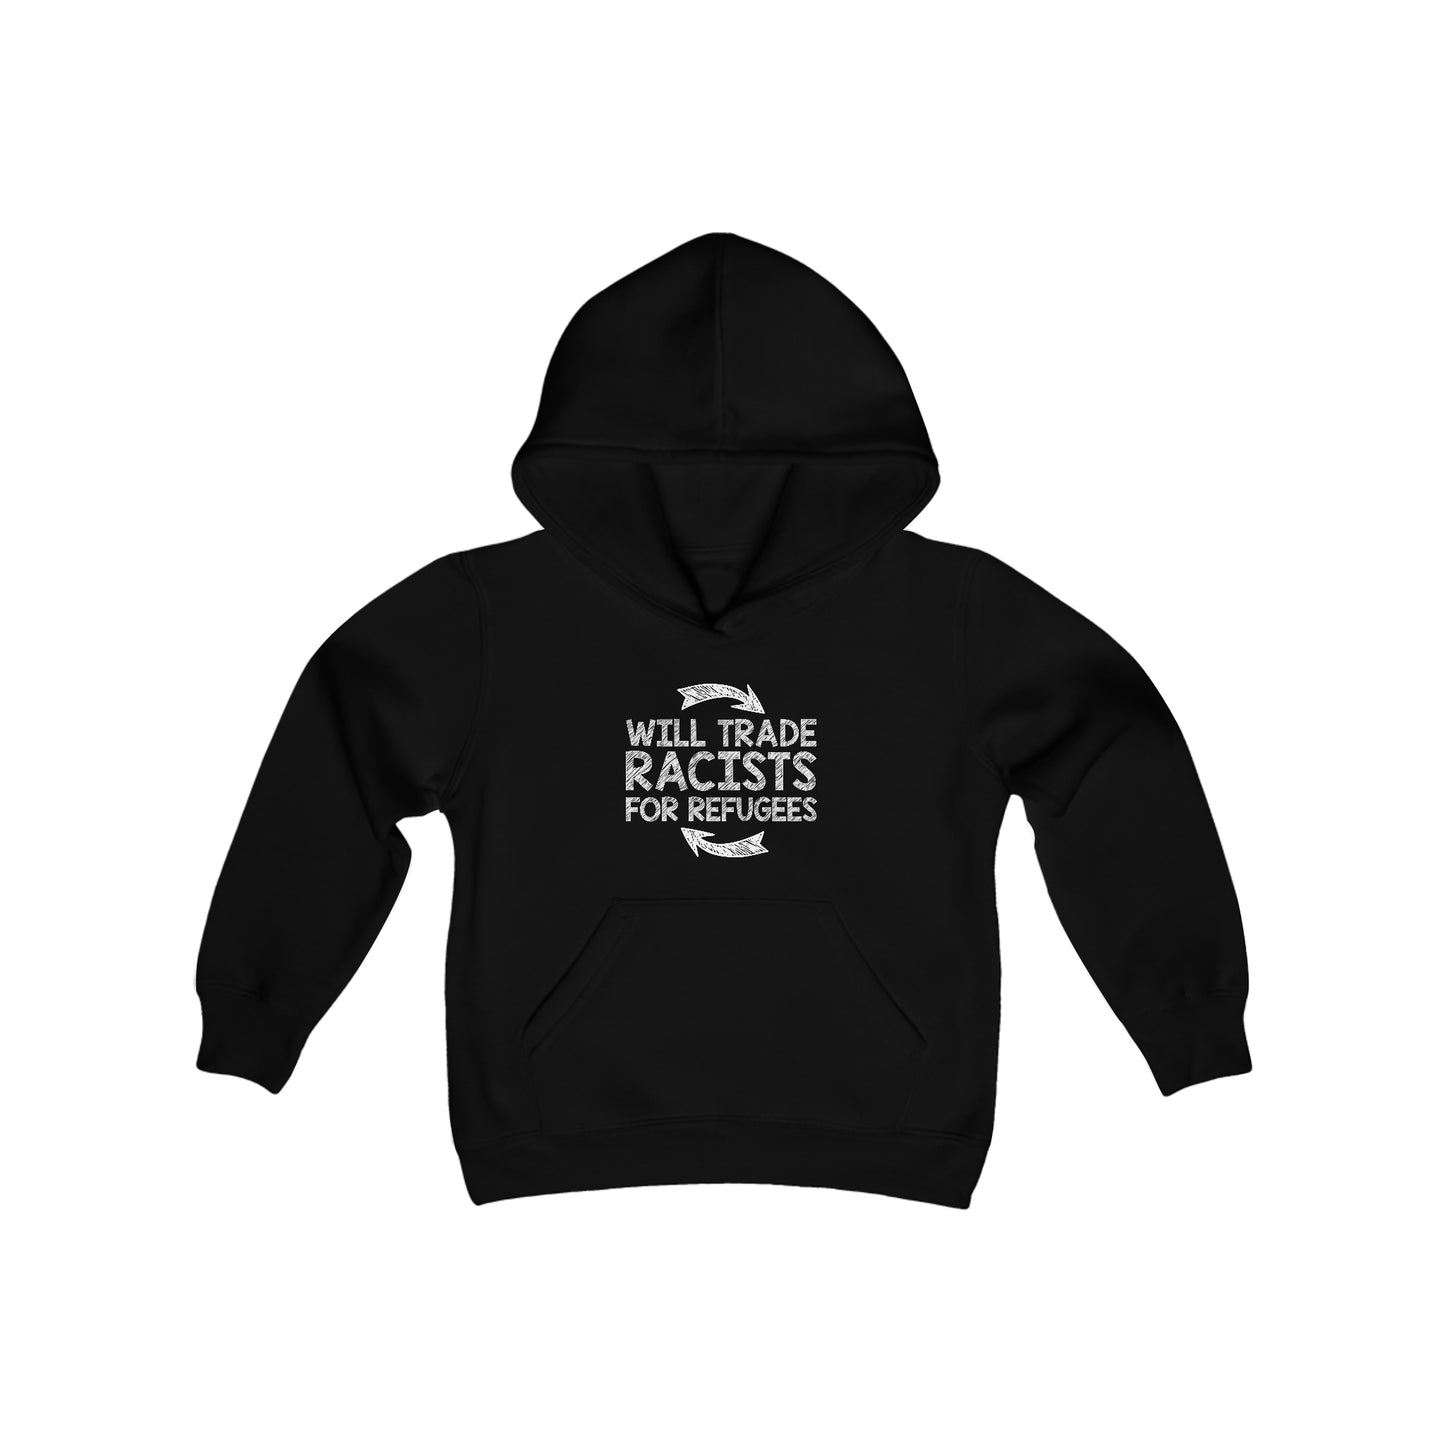 “Will Trade Racists for Refugees” Youth Hoodie